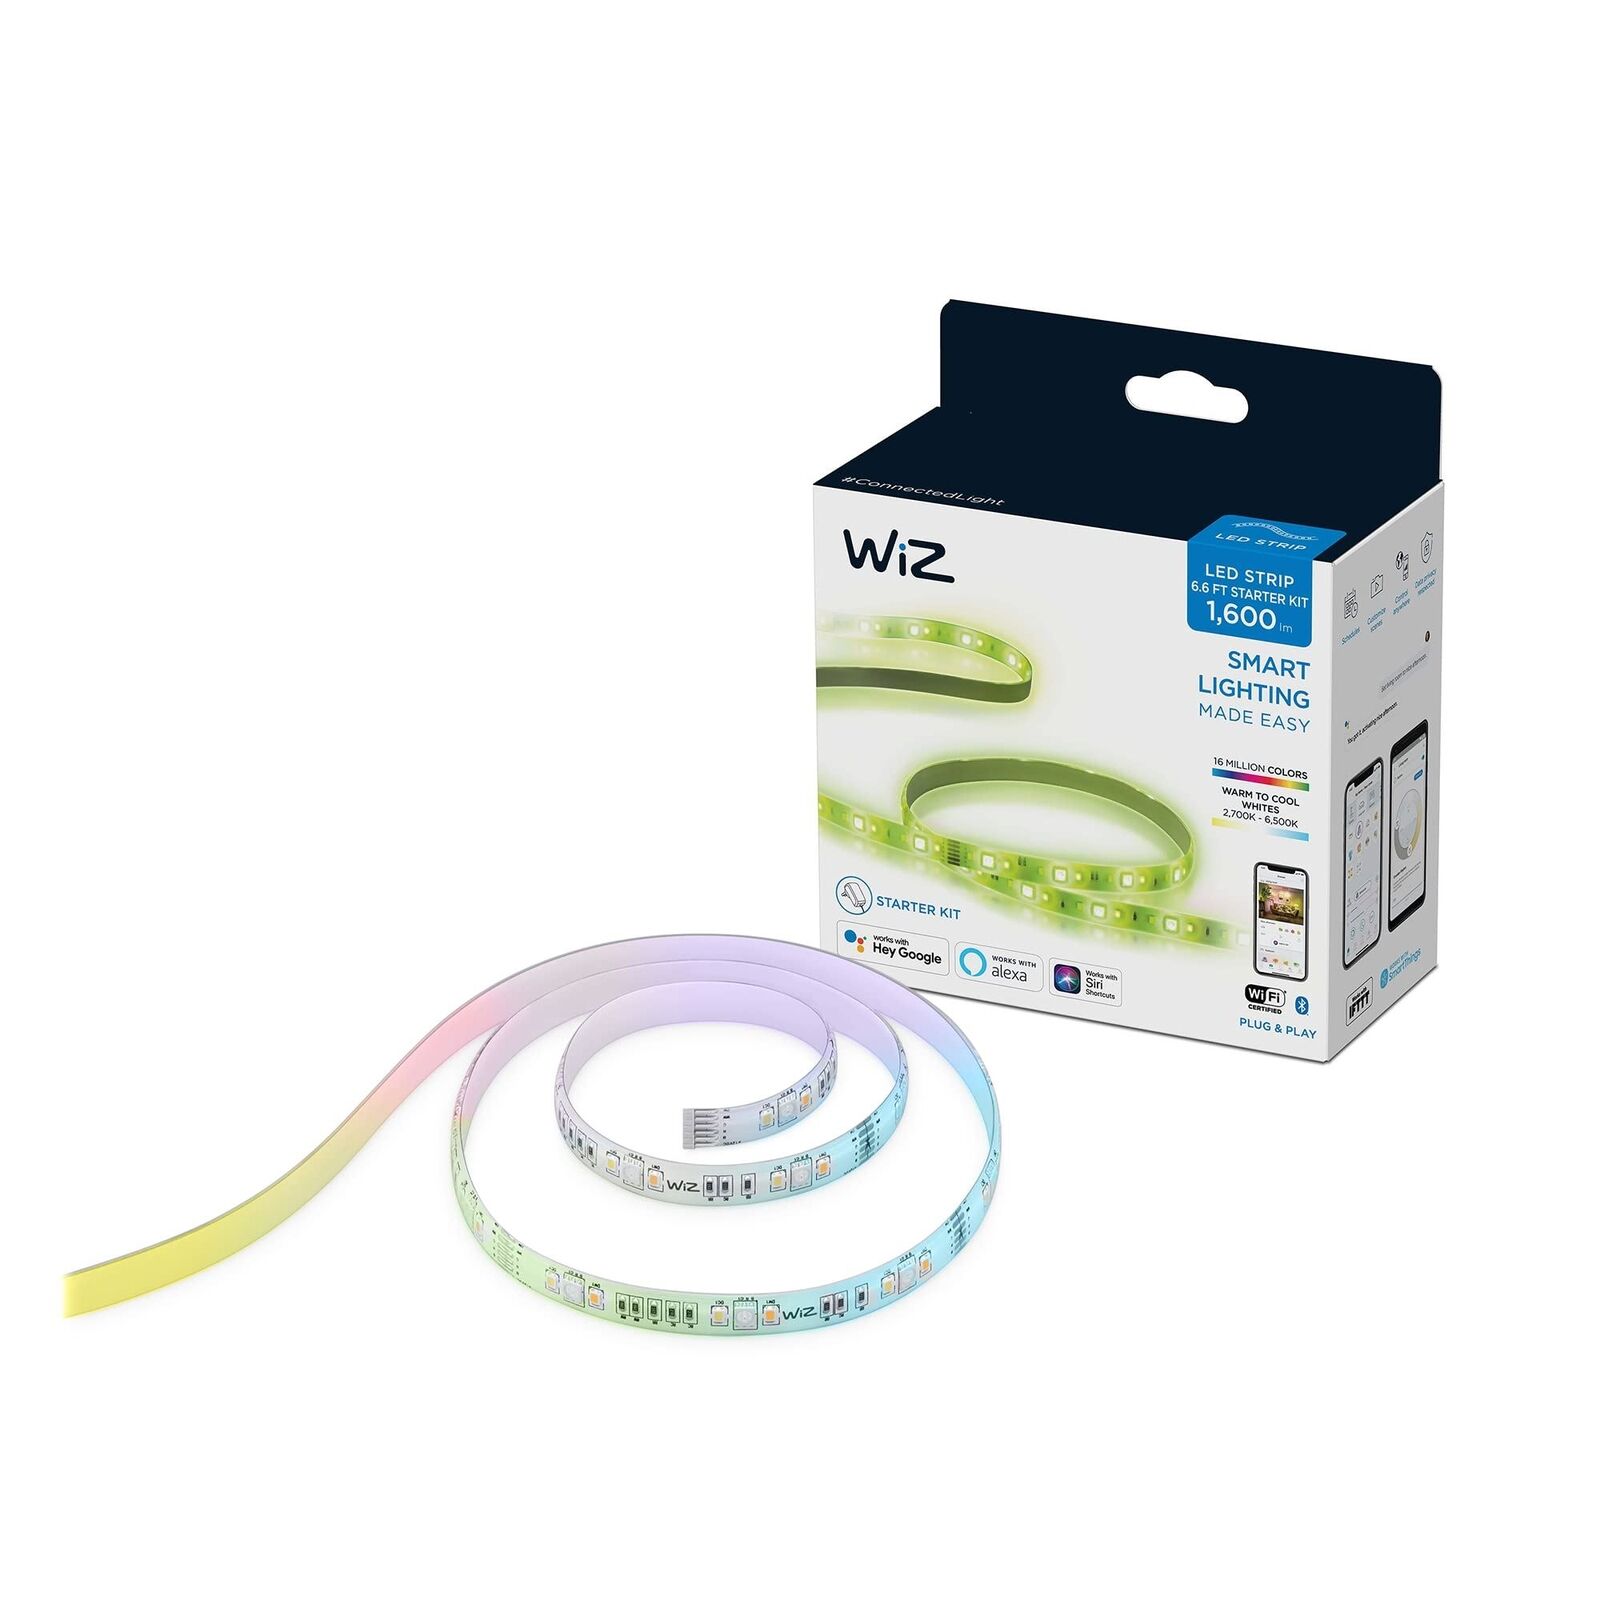 WiZ 6FT RGB Wi-Fi LED Smart Color Changing Light Strip - Connects to Your Existi